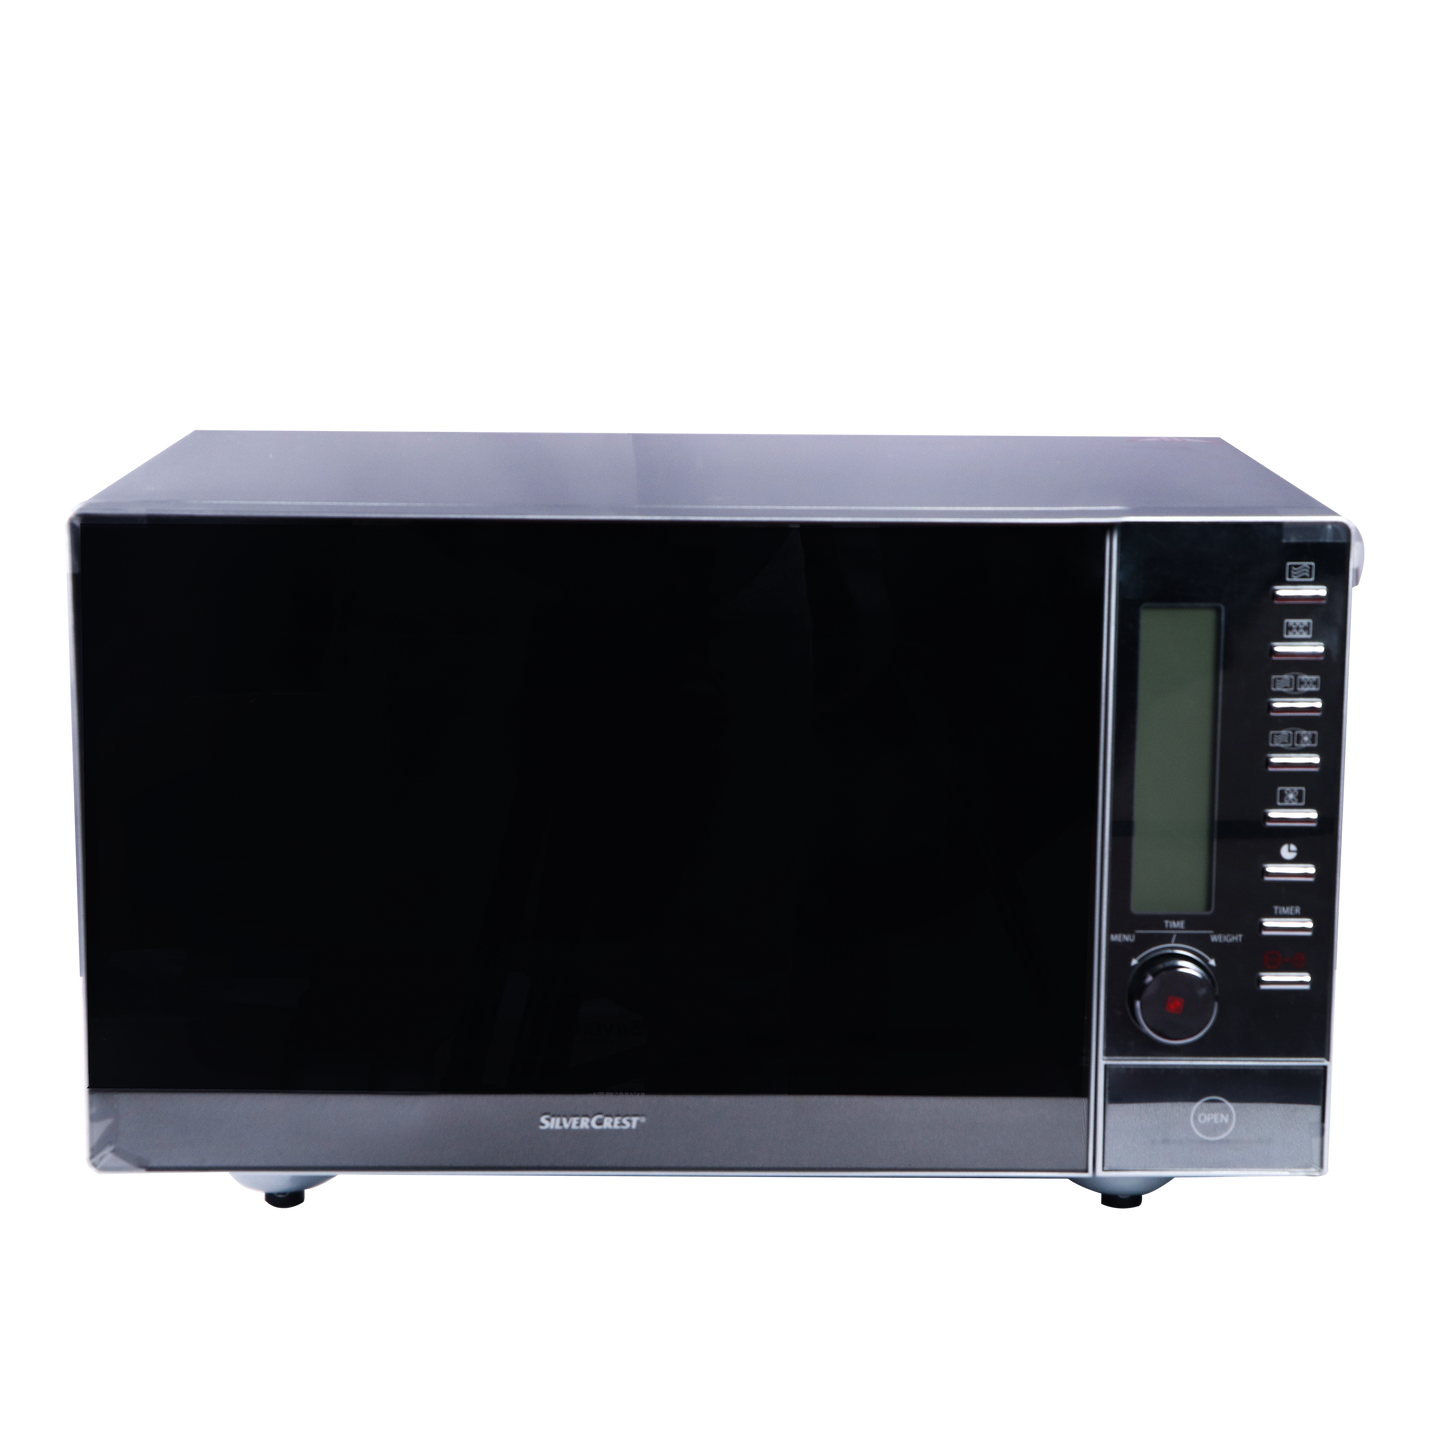 SILVERCREST Stainless Steel Microwave Oven Max. 1950 Watts 25L